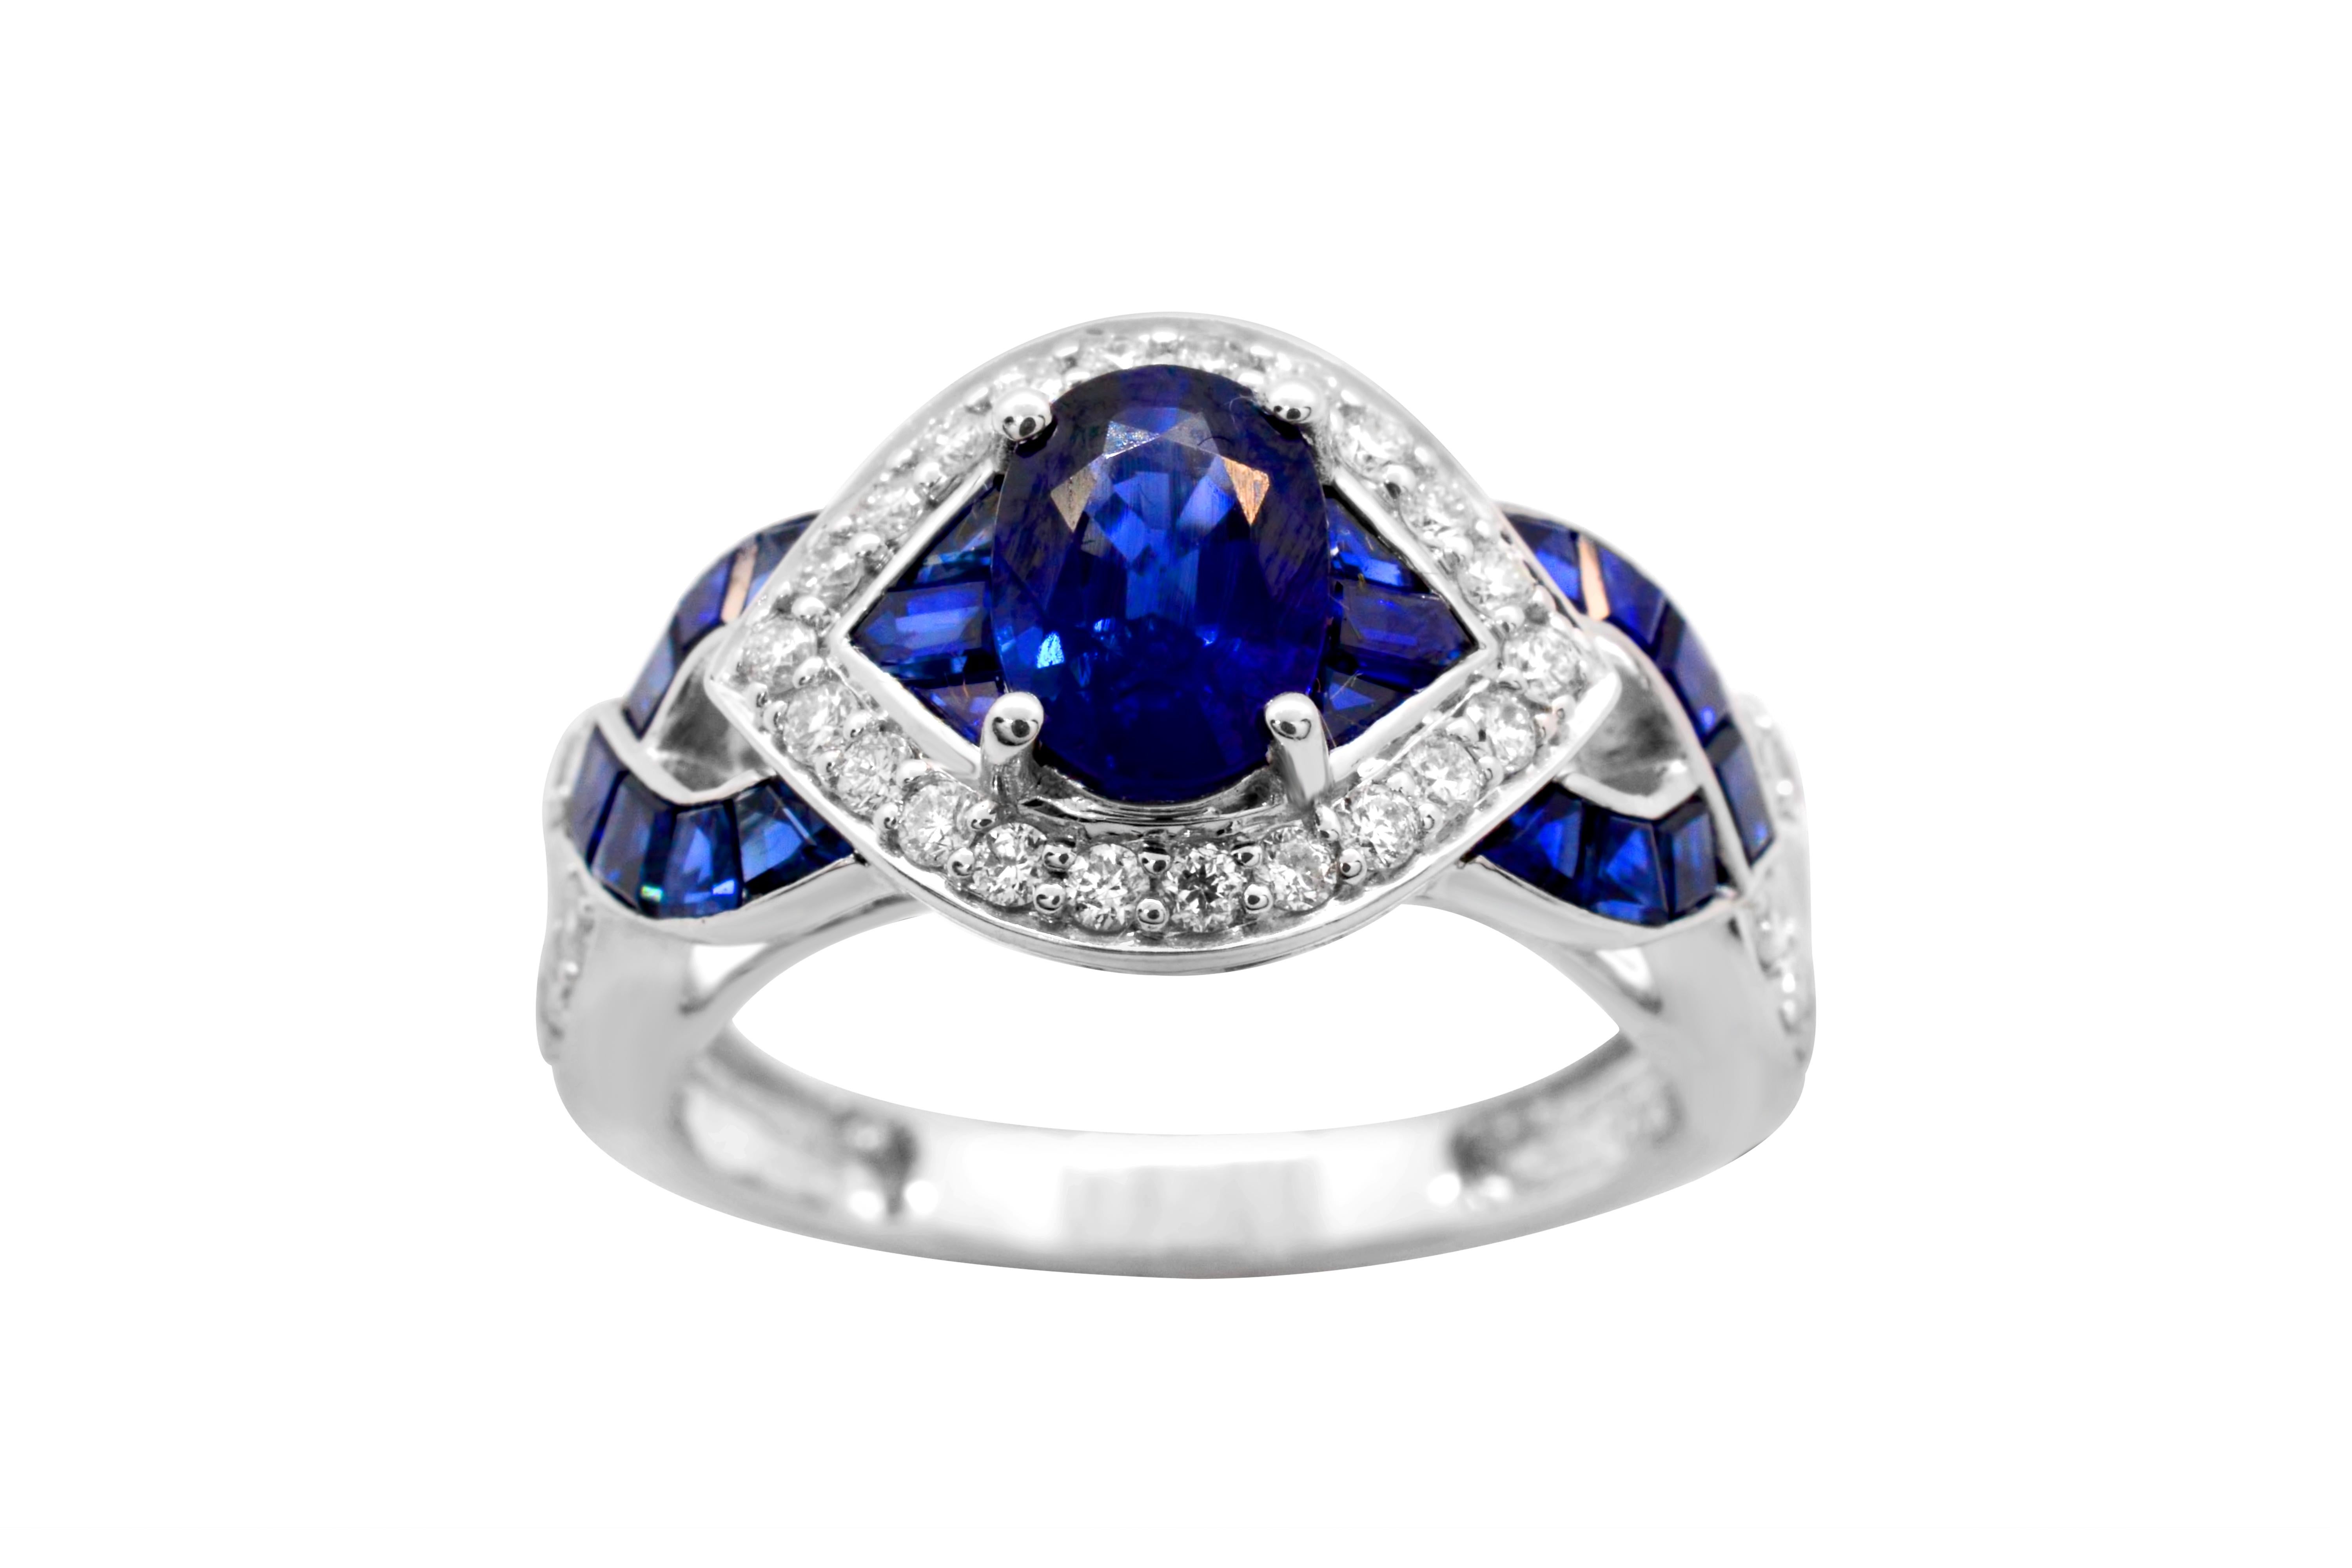 Oval Blue Sapphire with Diamond and Openwork Criss Cross Ring.  This ring has an oval blue sapphire measuring 7 x 5 mm at the center.  There are additional blue sapphire baguettes of varying sizes on either side of the center oval as well as the